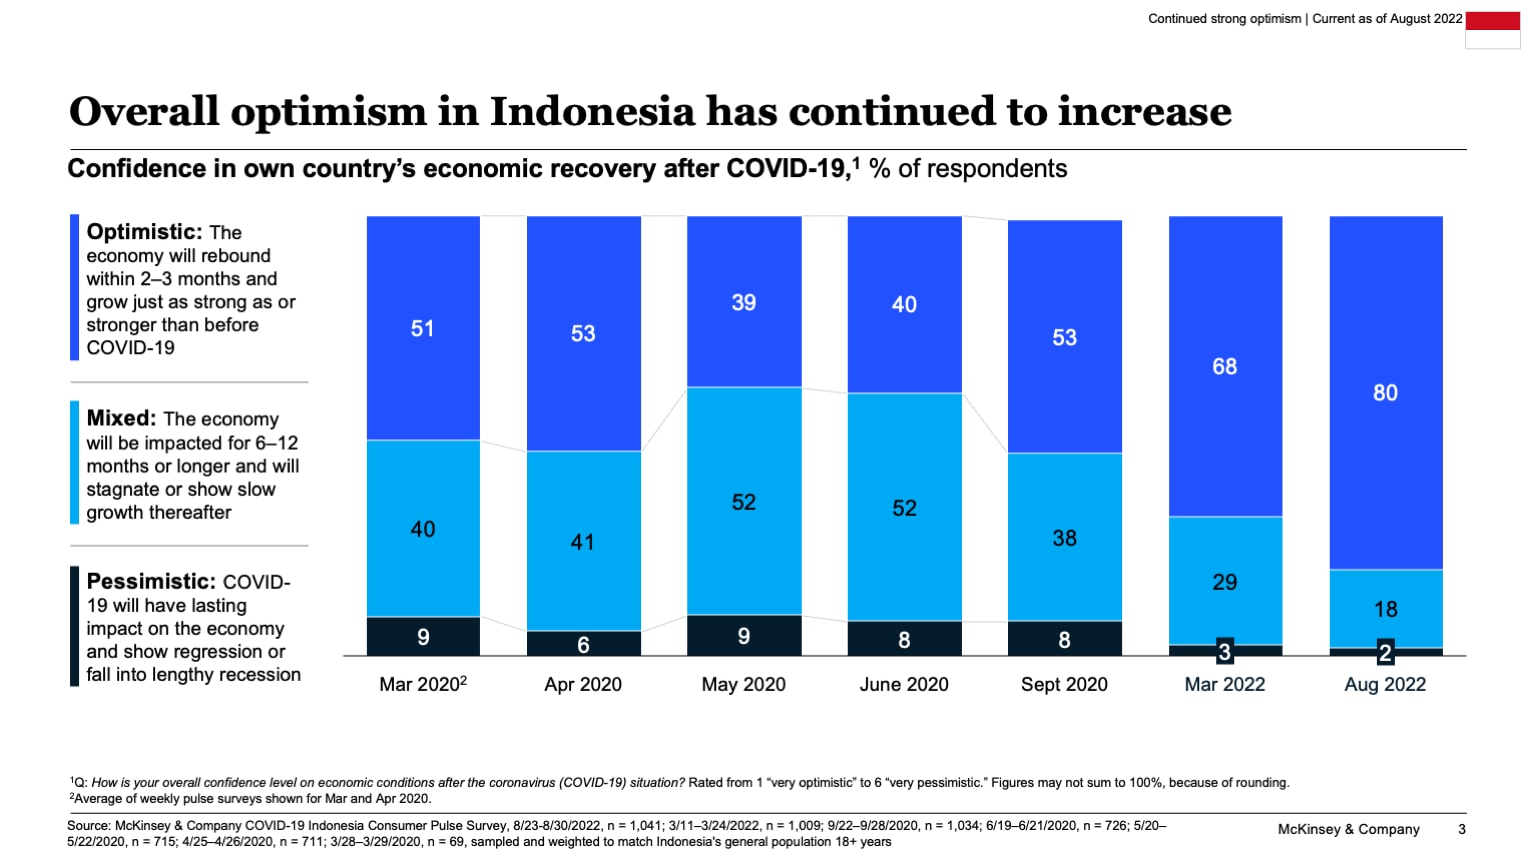 Overall optimism in Indonesia has continued to increase